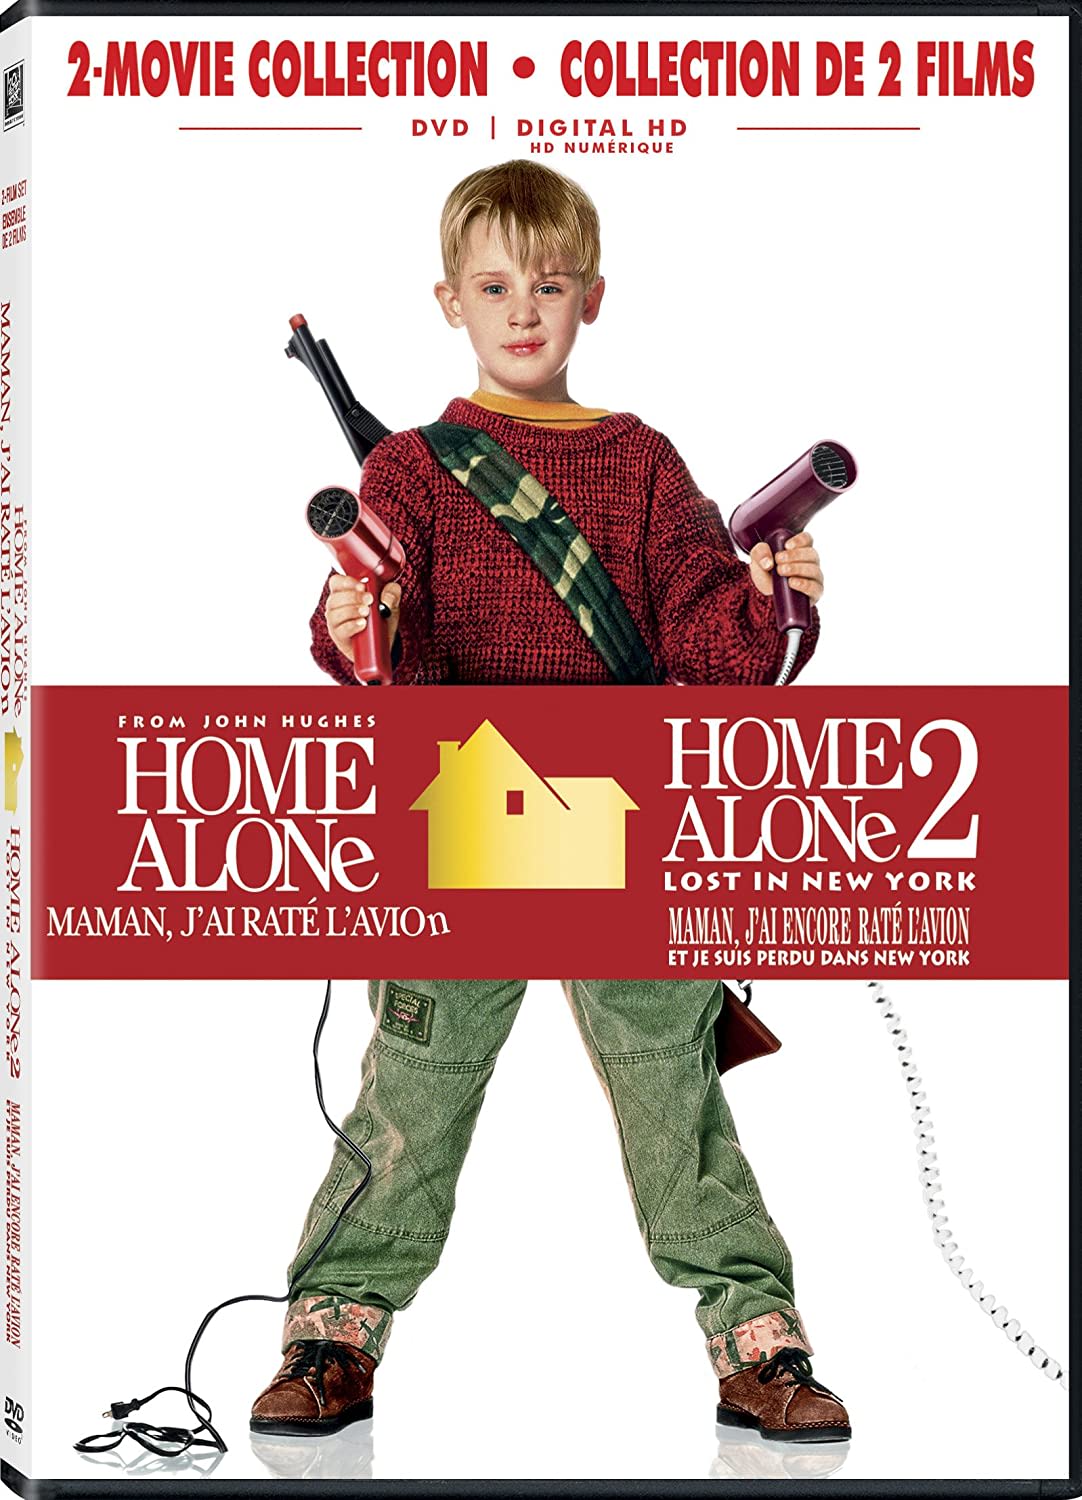 Home Alone / Home Alone 2: Lost In New York (DVD) on MovieShack